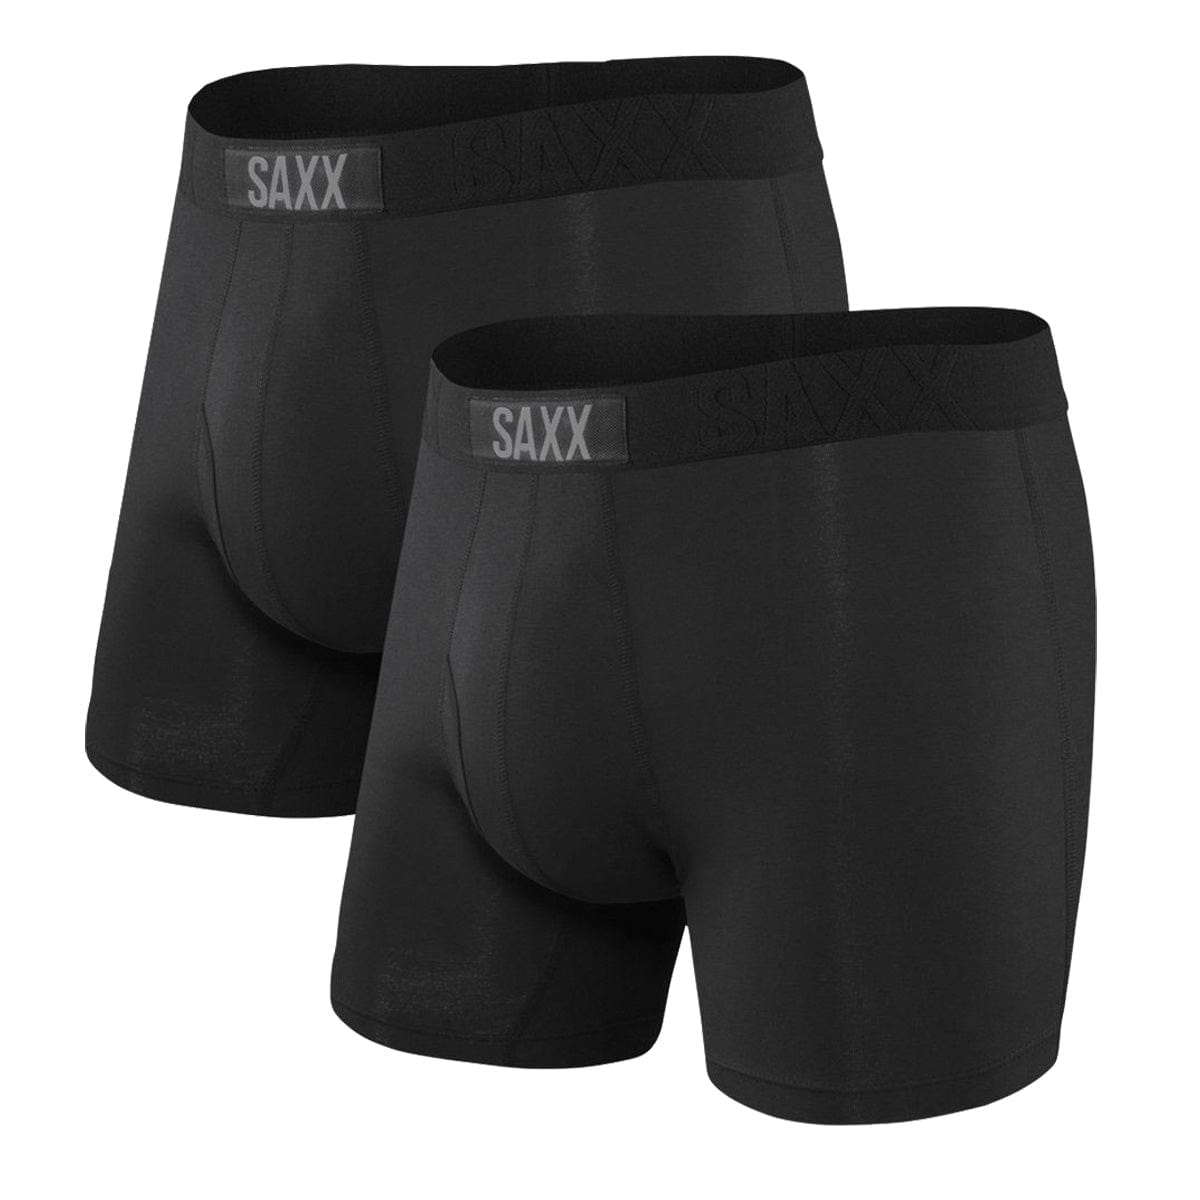 Saxx Ultra Boxers - Black / Black (2 Pack) - The Hockey Shop Source For Sports